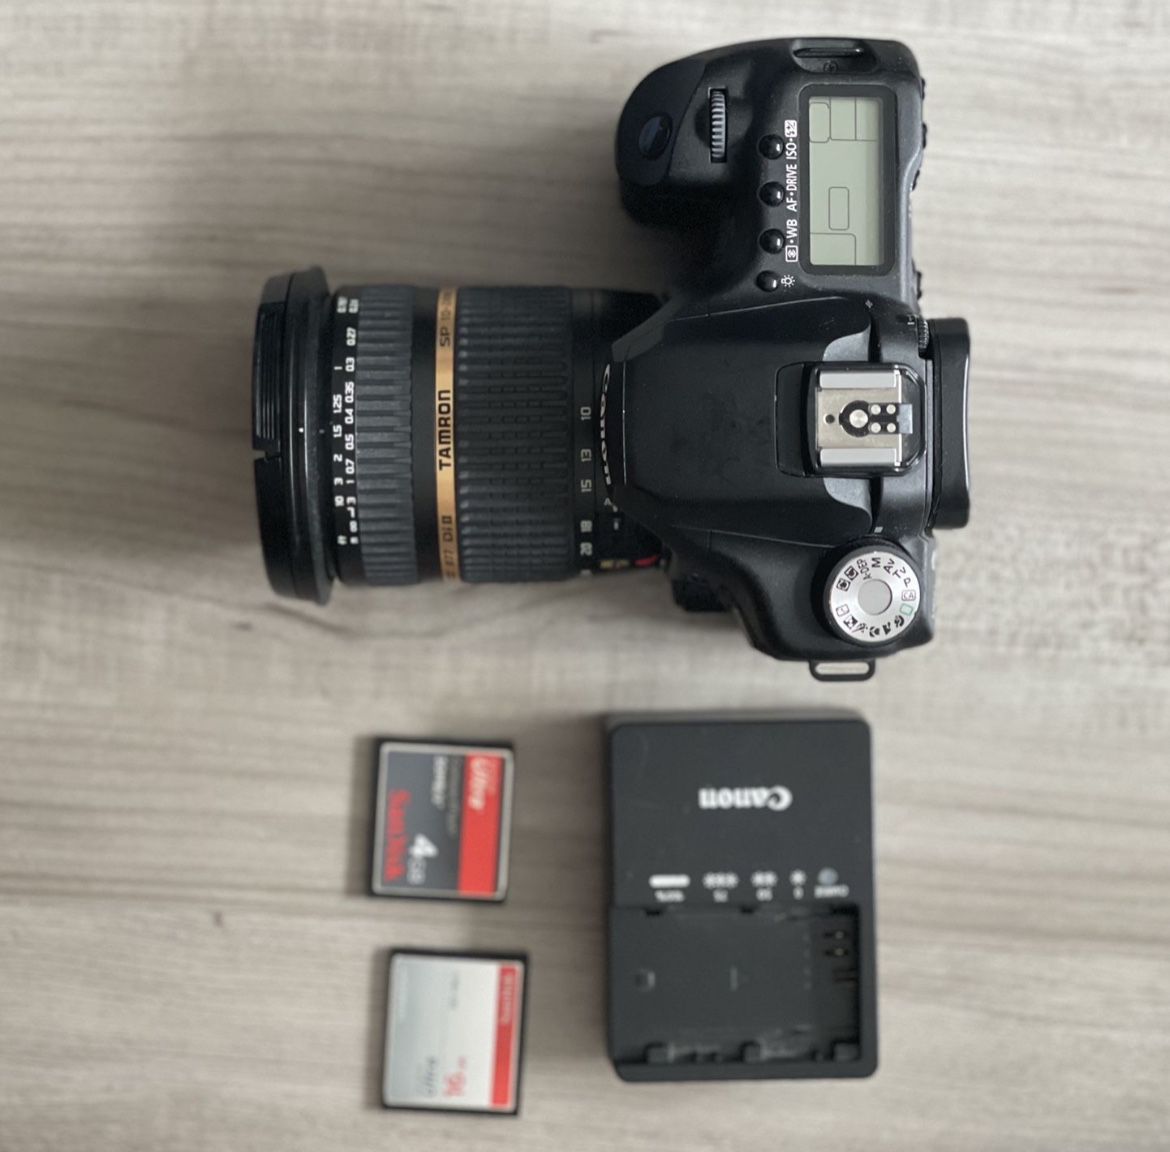 Canon 50D Digital Camera (Body only)